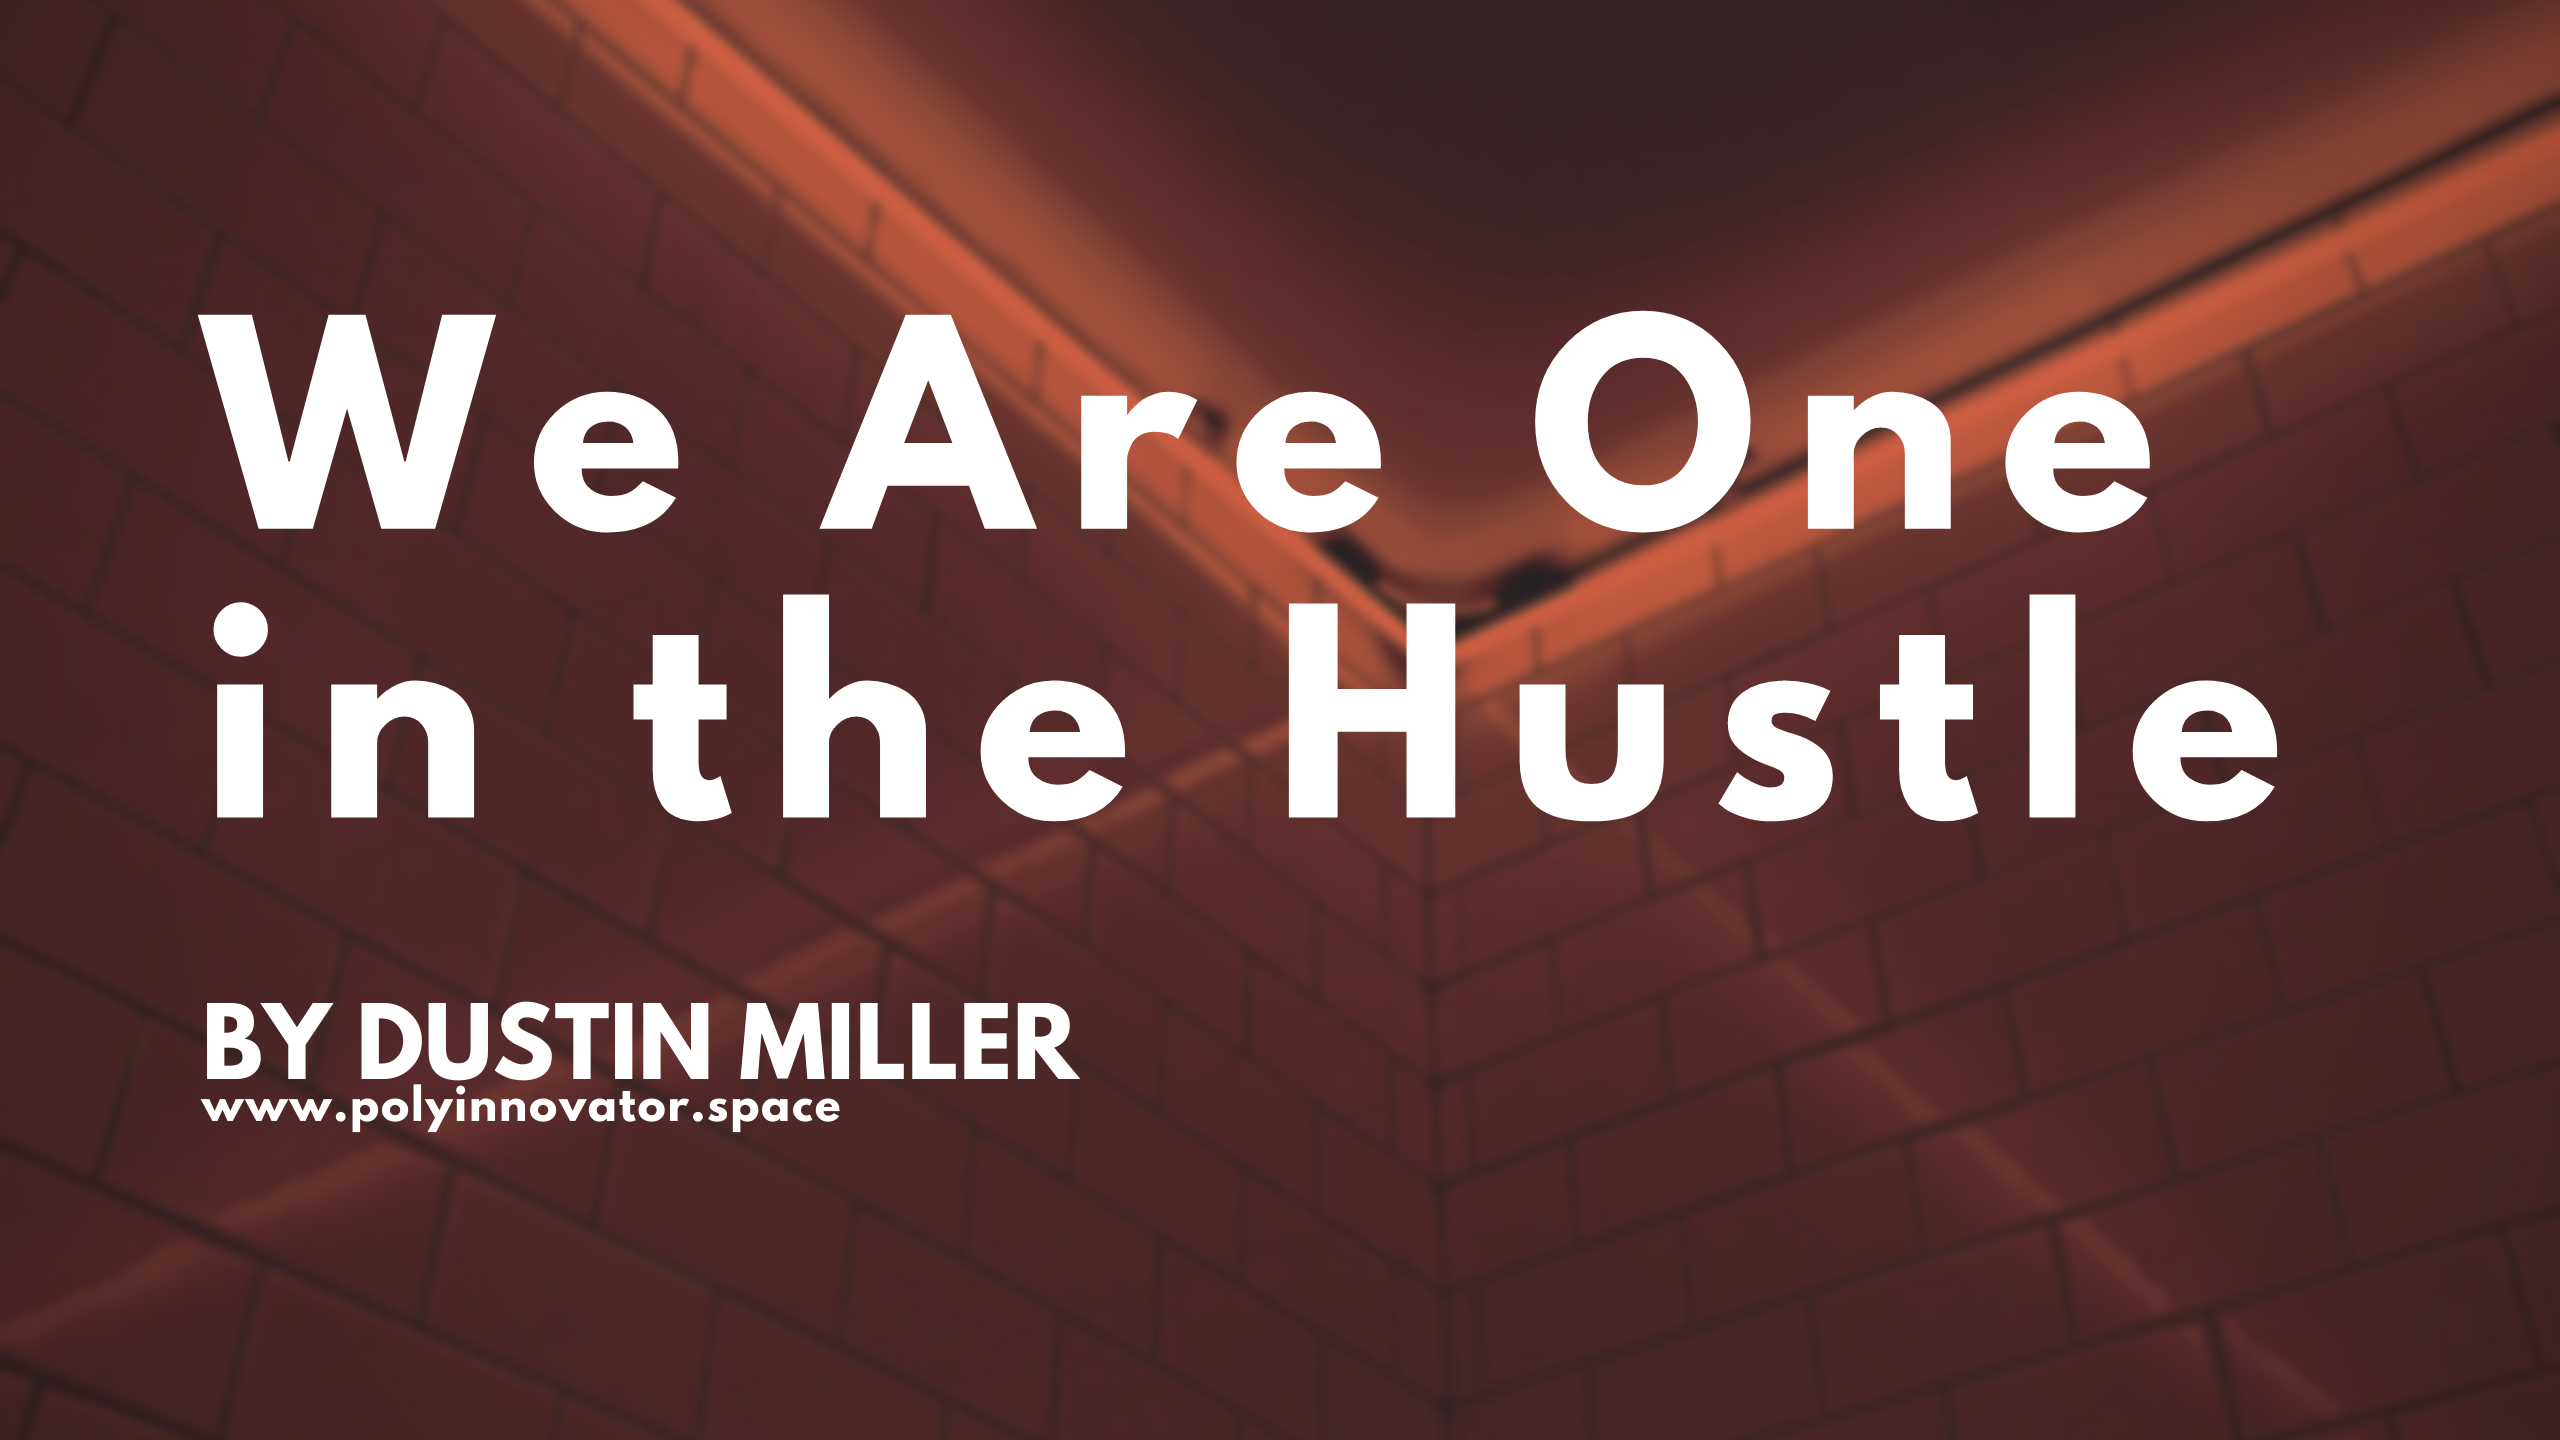 We Are One in the Hustle